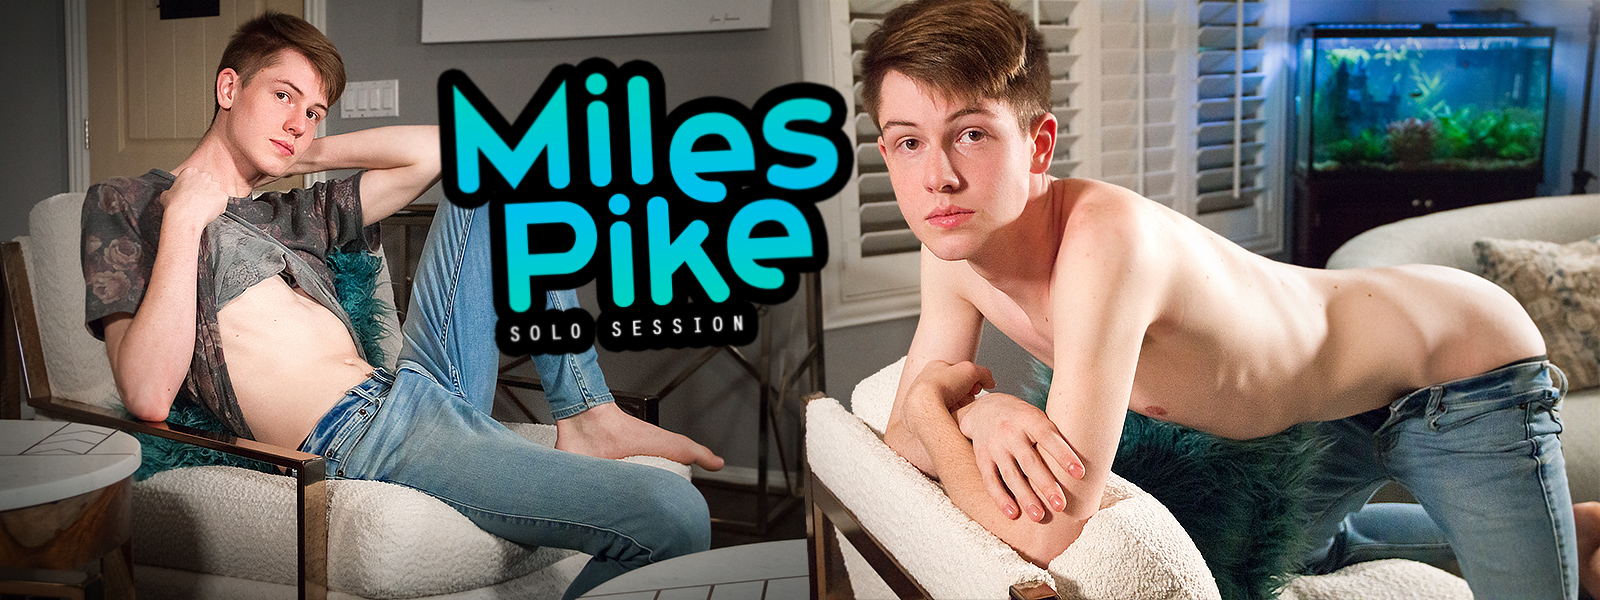 Miles Pike Solo Session